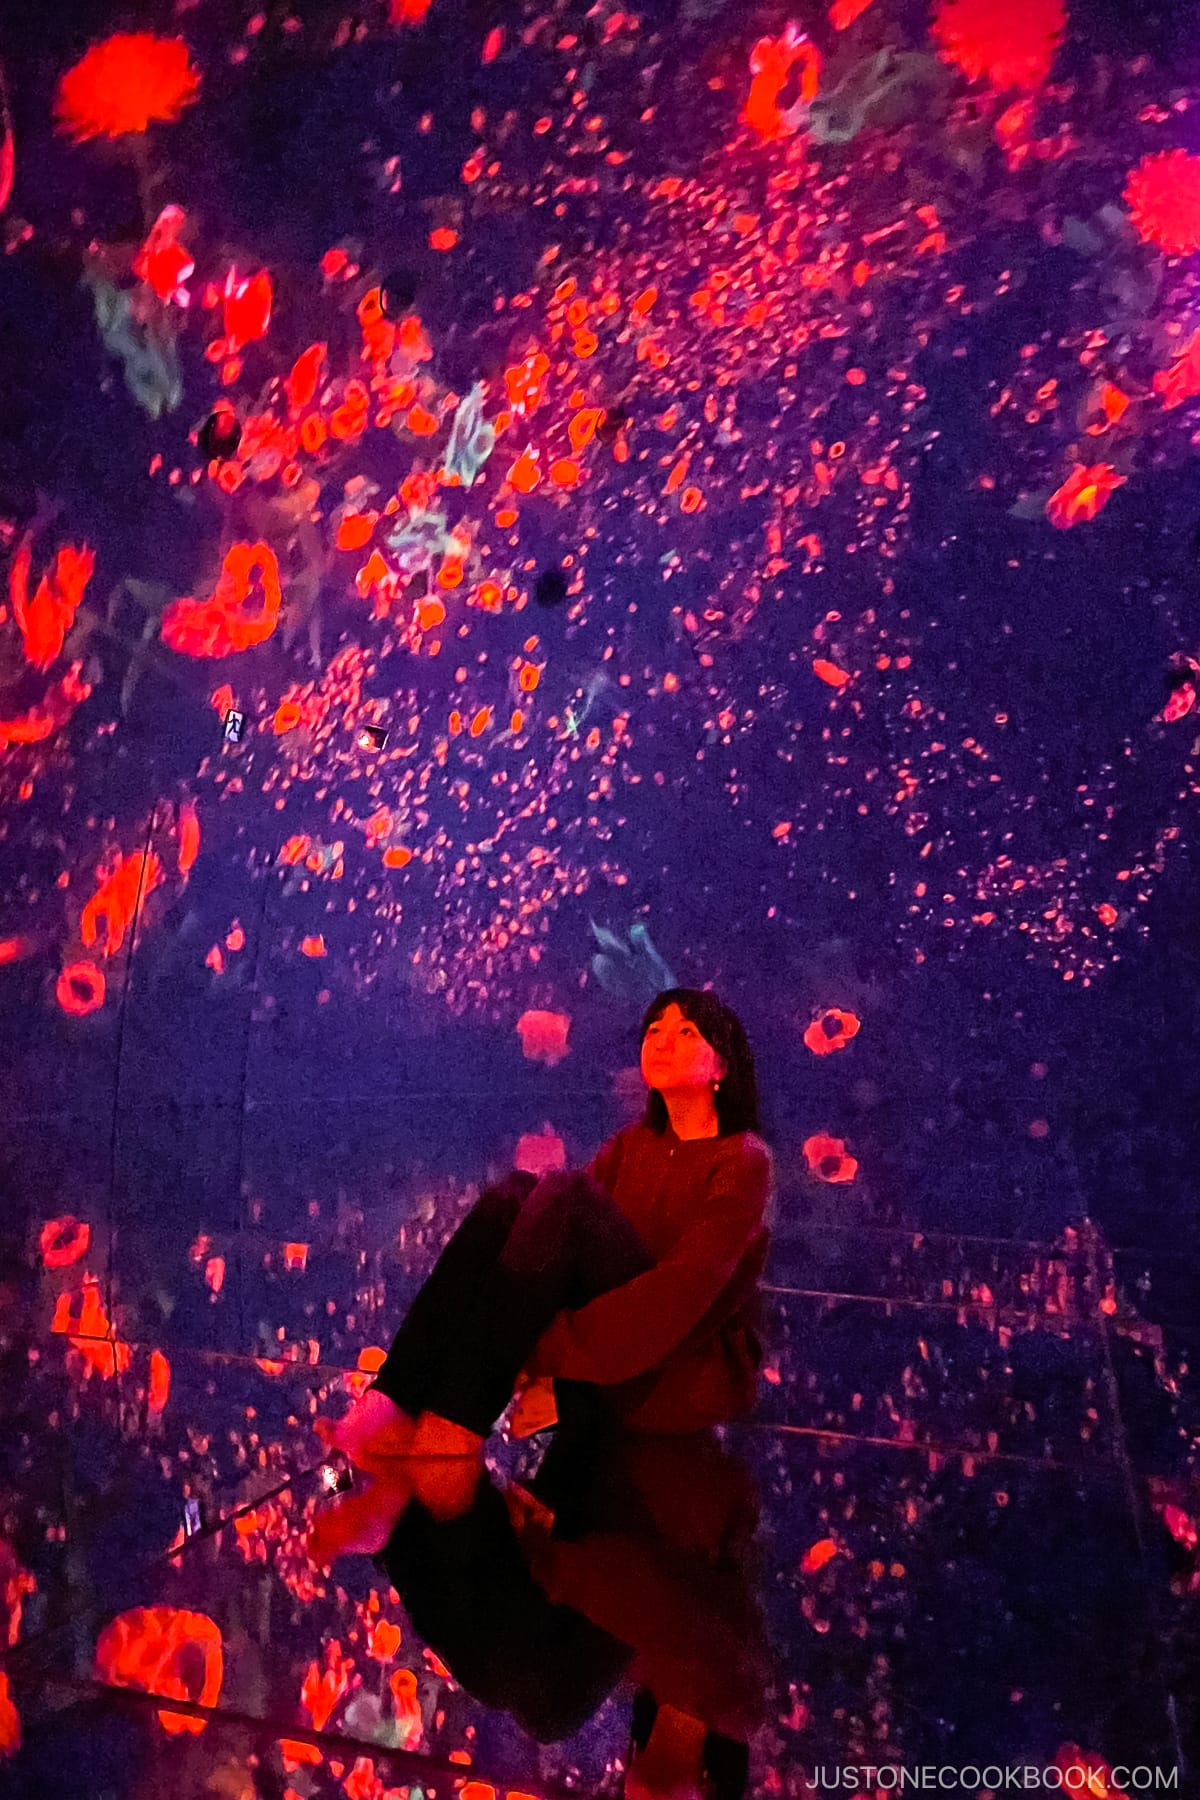 Floating in the Falling Universe of Flowers